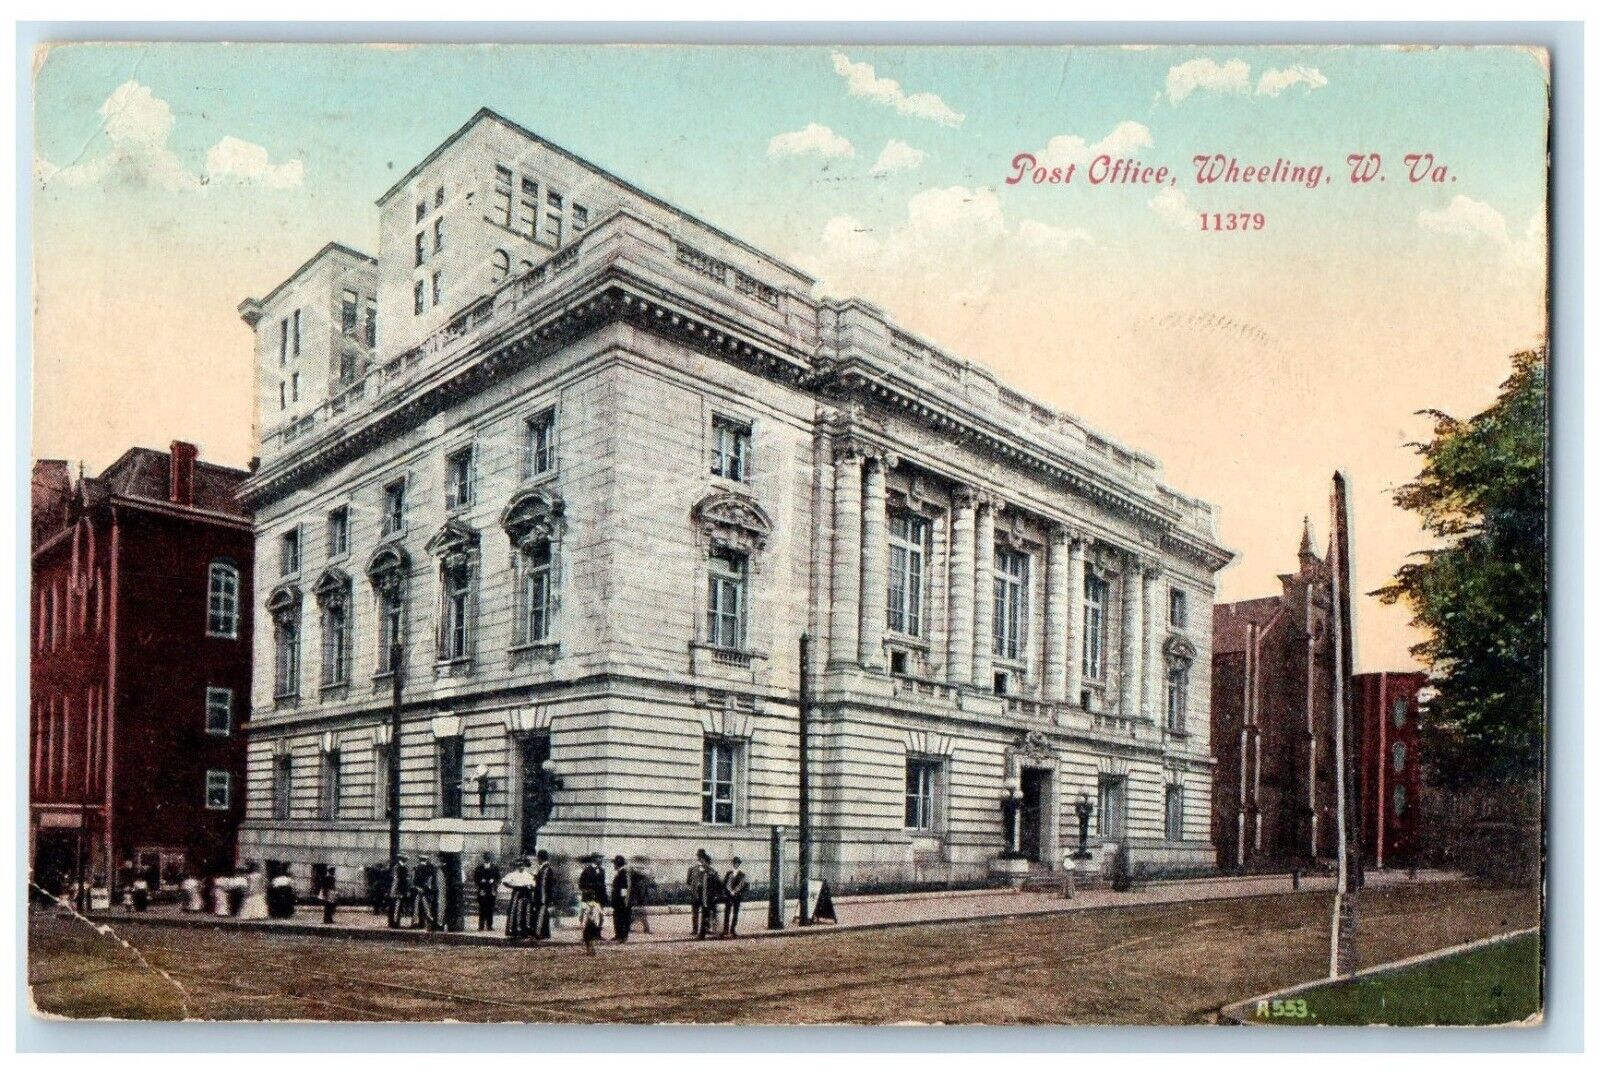 1911 Post Office Building Wheeling West Virginia WV Posted Antique Postcard